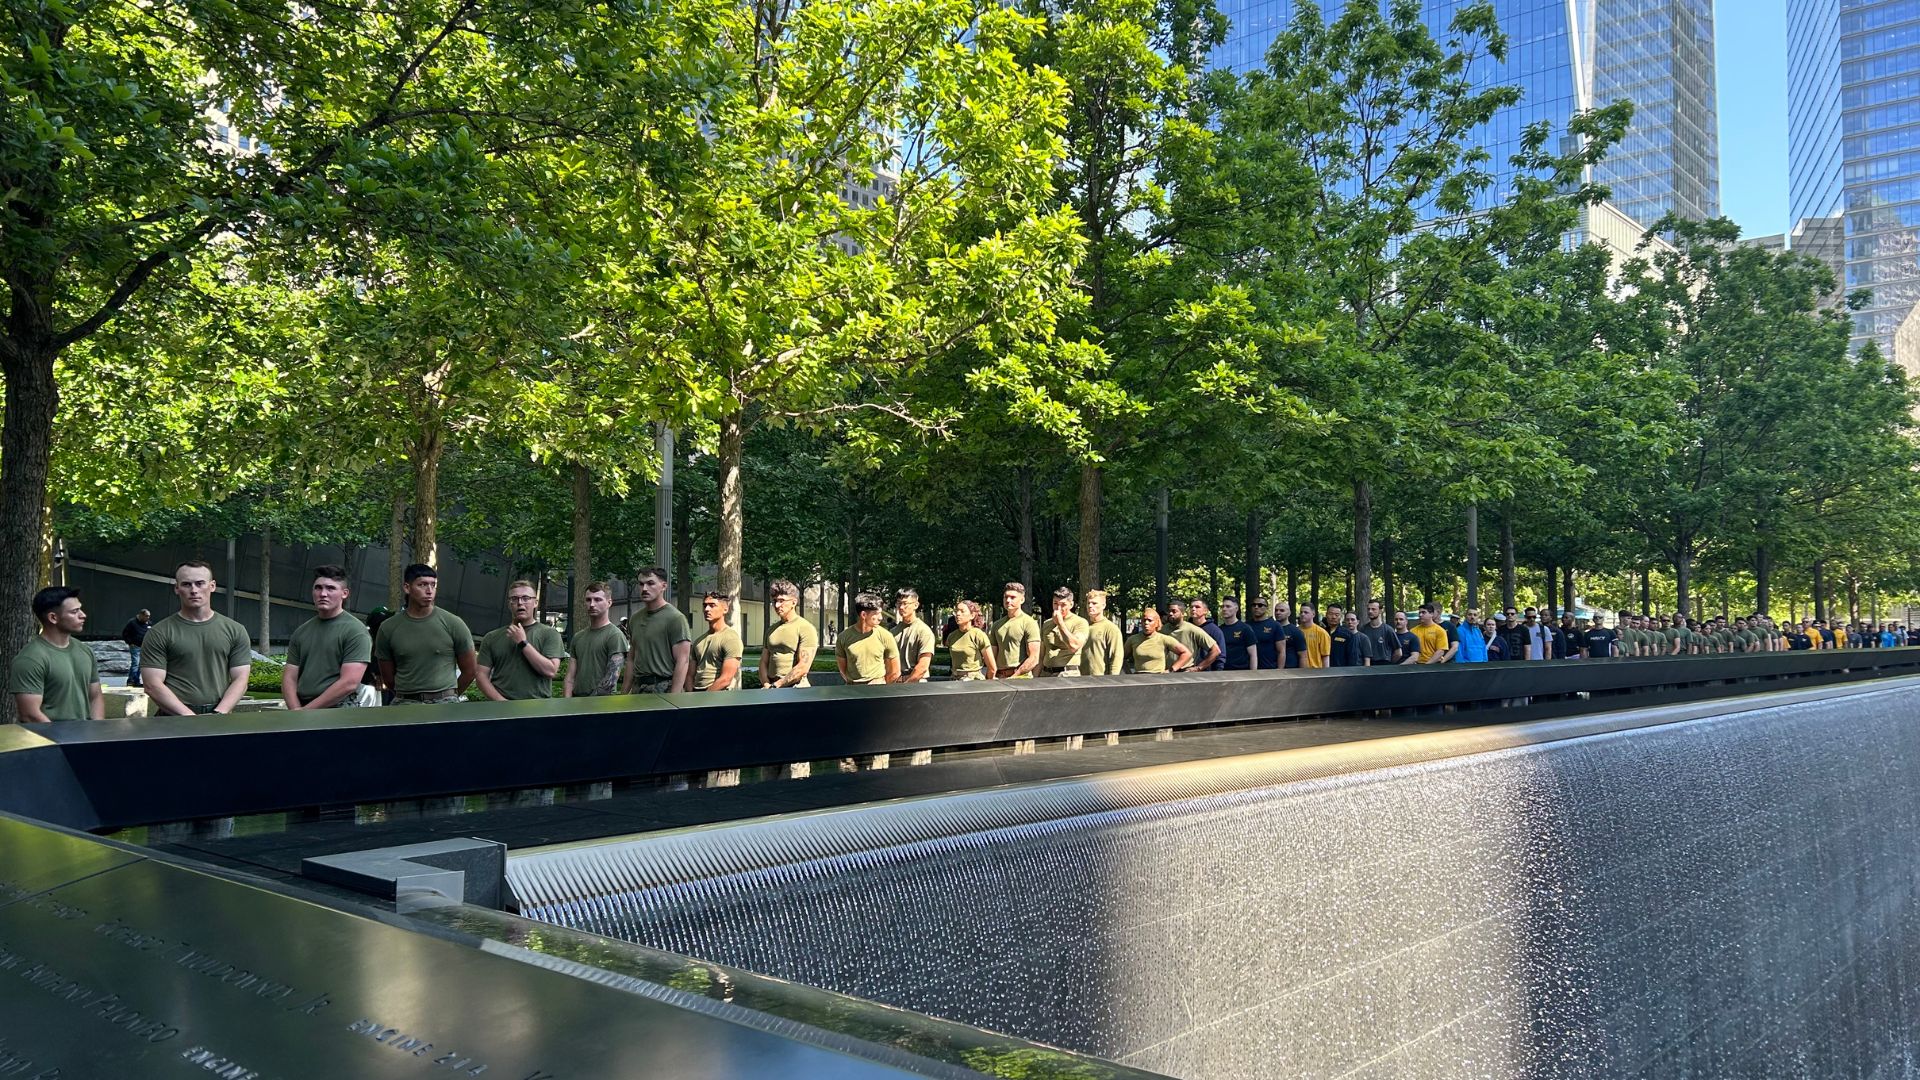 A line of military members in army green, navy blue, and bright yellow tee shirts lines one side of the Memorial pool. Behind them is a row of lush green trees in sunlight, and the corner of One World Trade is viewable at top right.